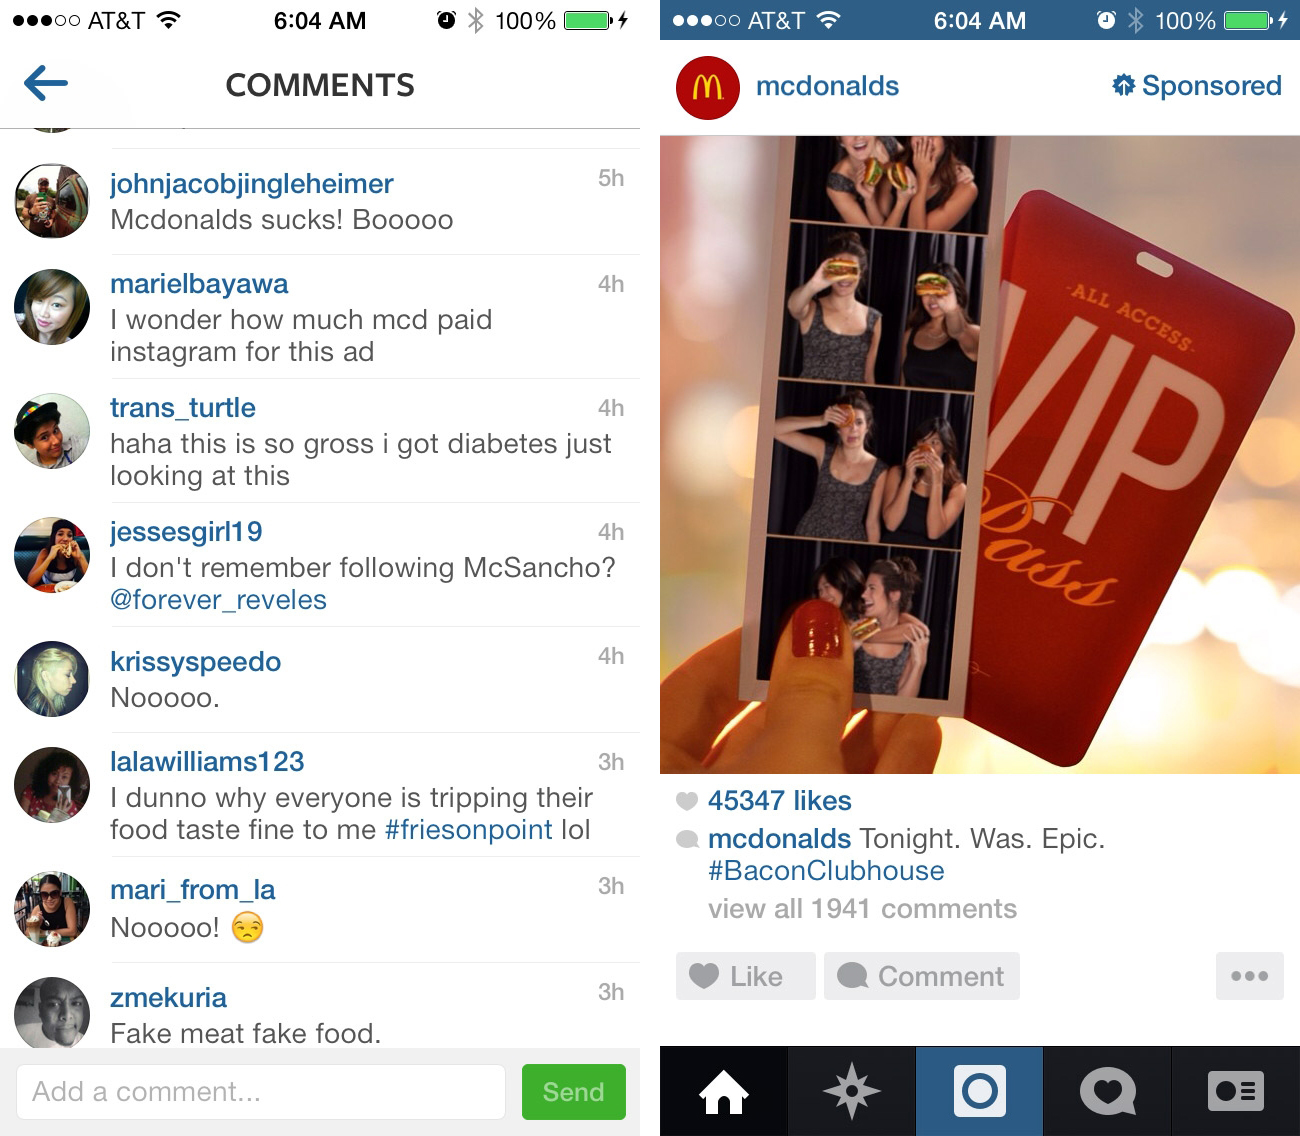 McDonald’s Mistakenly Thinks It Is Loved By Internet, Will Not Be Mercilessly Mocked On Instagram